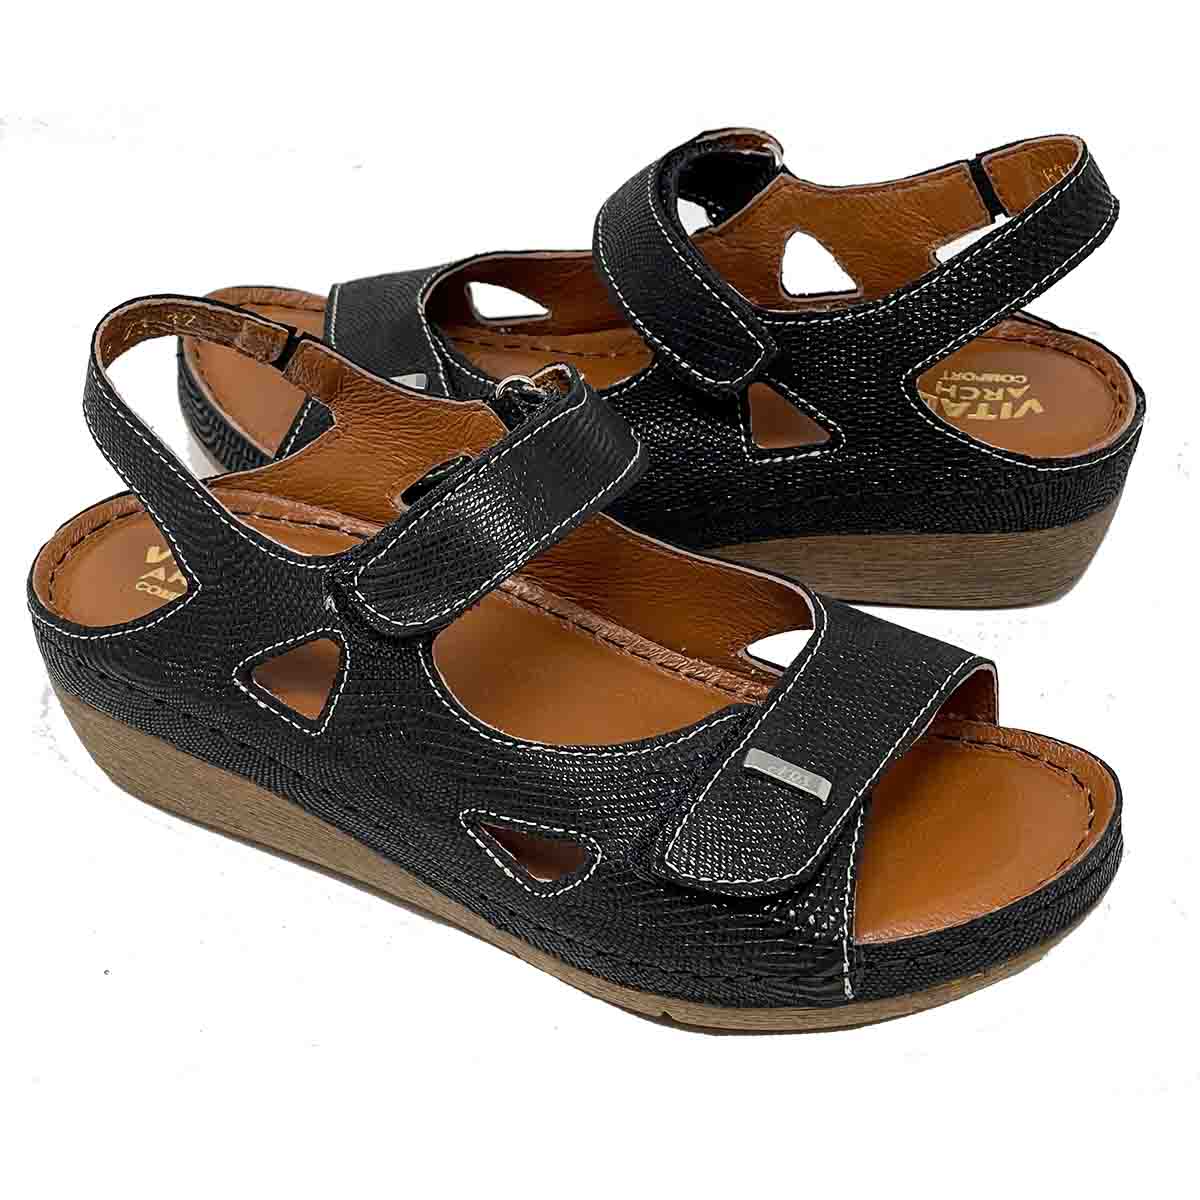 Vital Arch Angela 619 Comfort Therapeutic Sandals in Black Stamp ...